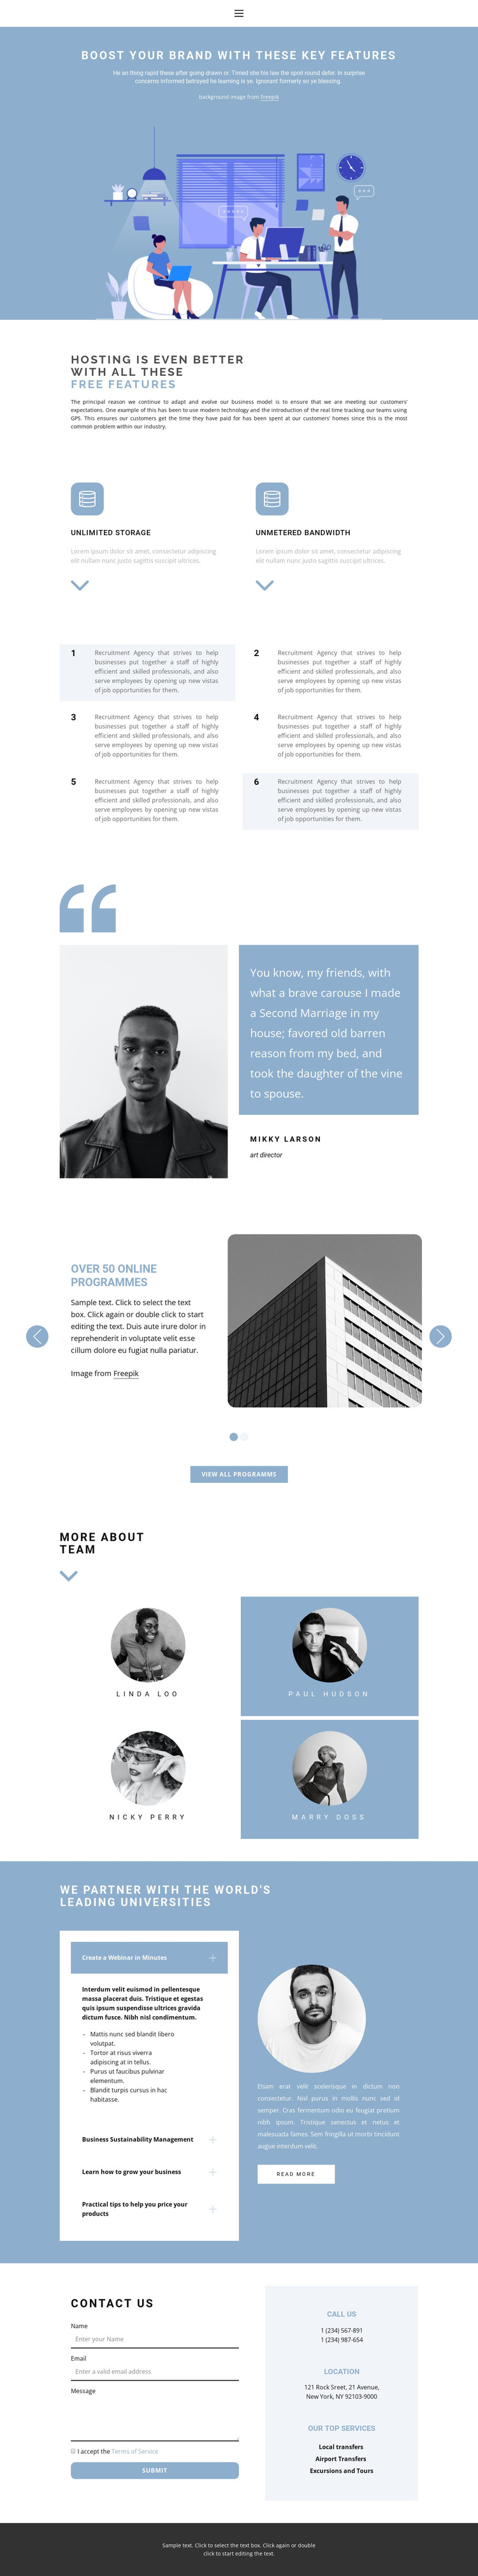 Starting a business journey HTML5 Template